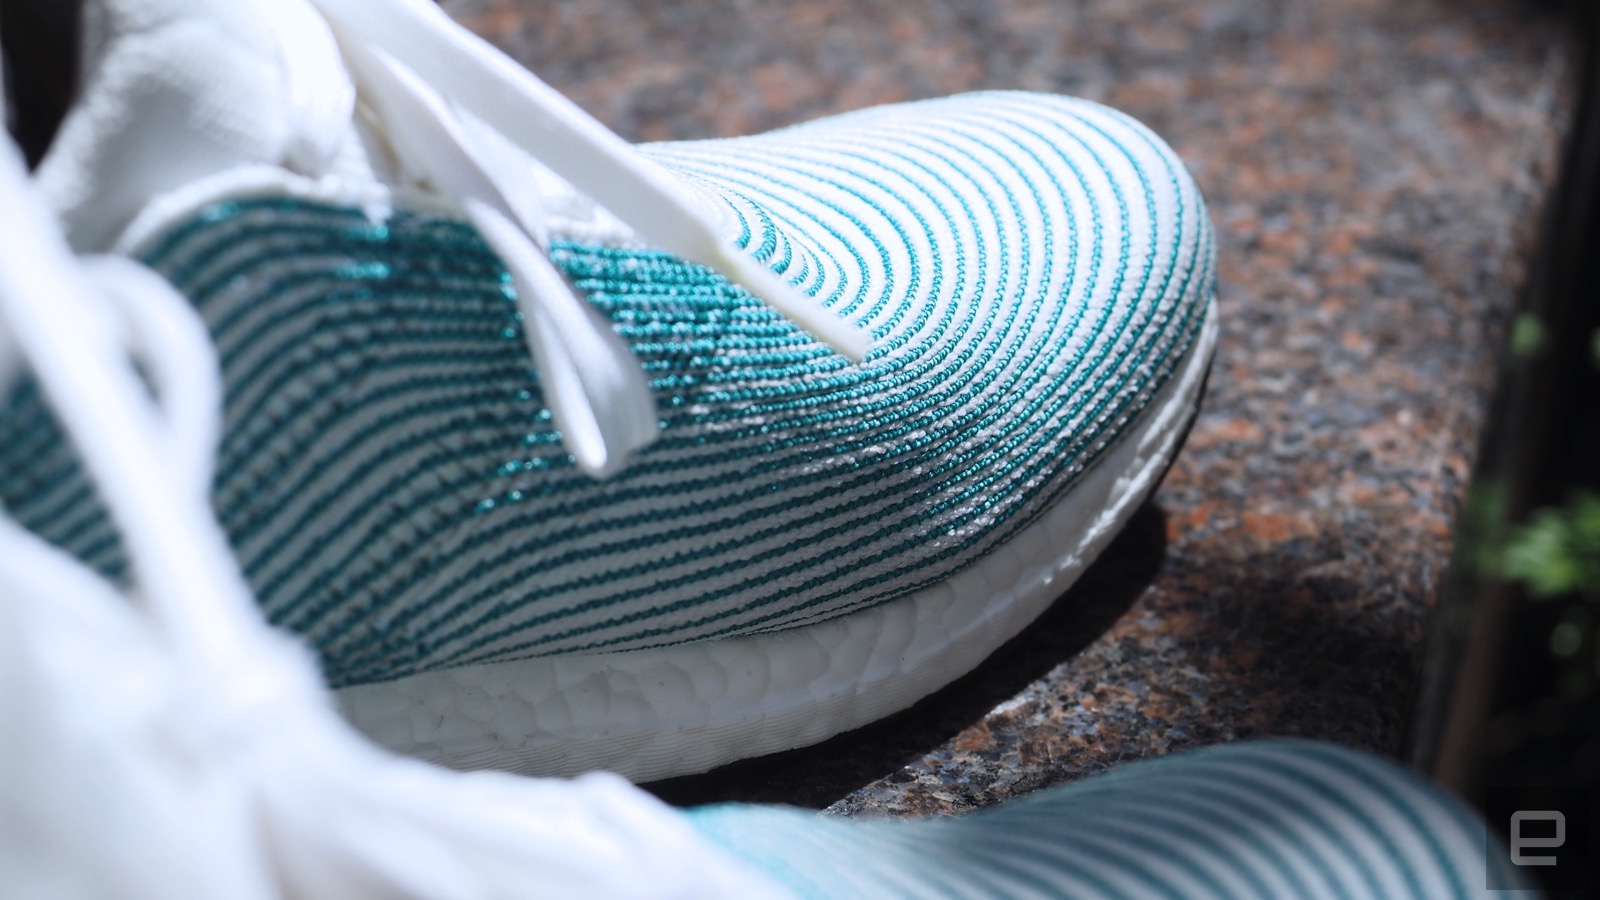 Manier Leidinggevende negeren Adidas gets creative with shoes made from recycled ocean plastic | Engadget